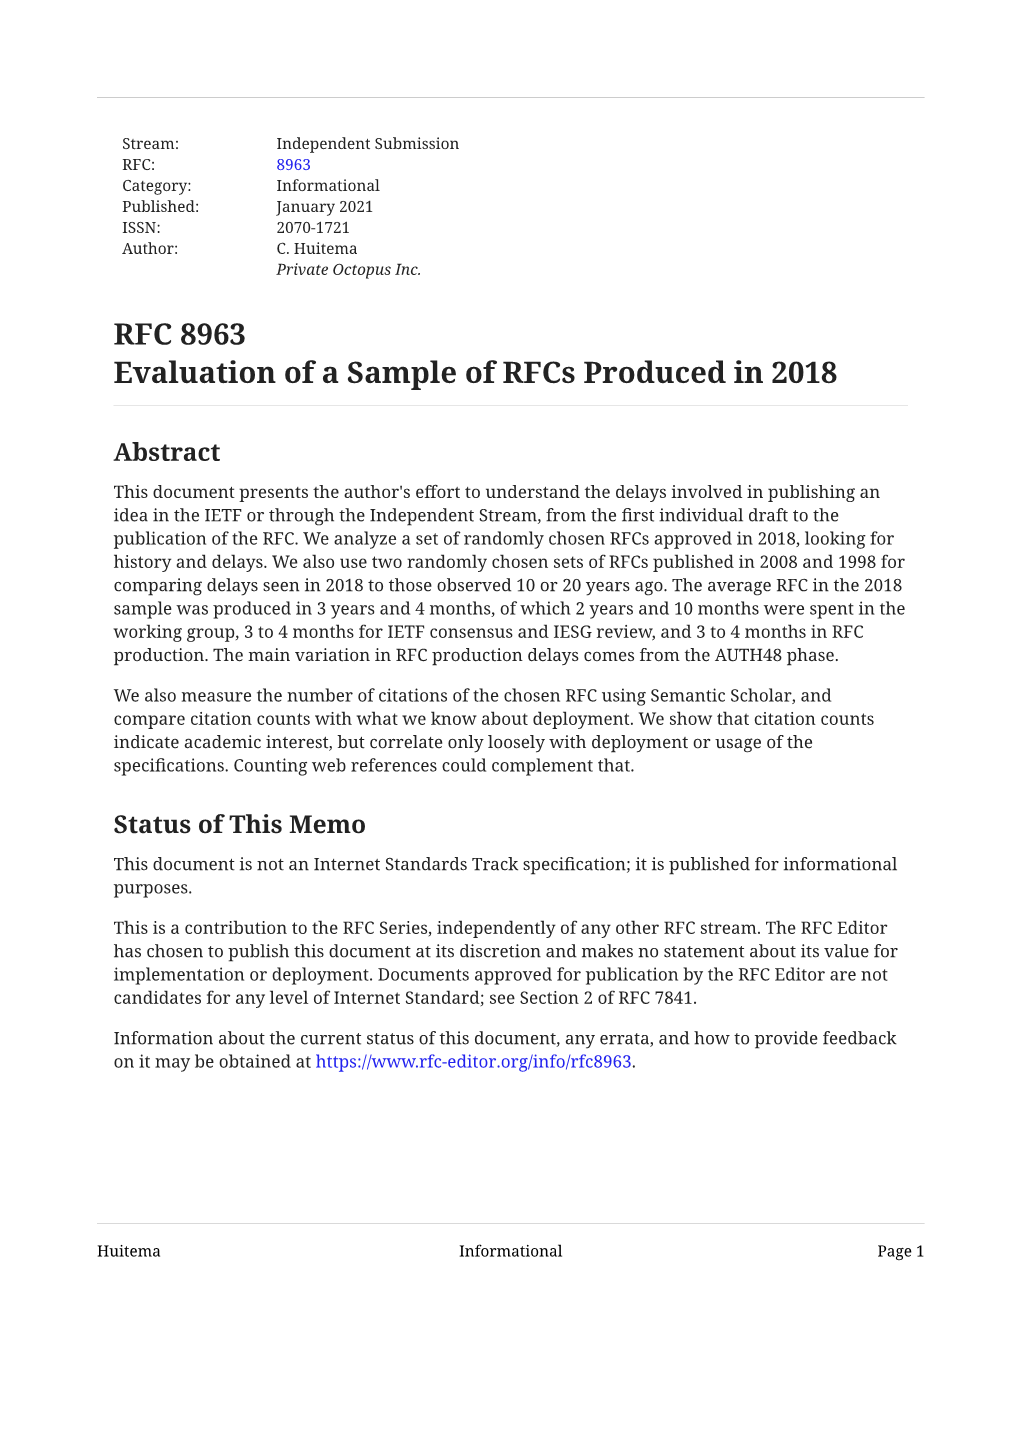 RFC 8963 Evaluation of a Sample of Rfcs Produced in 2018